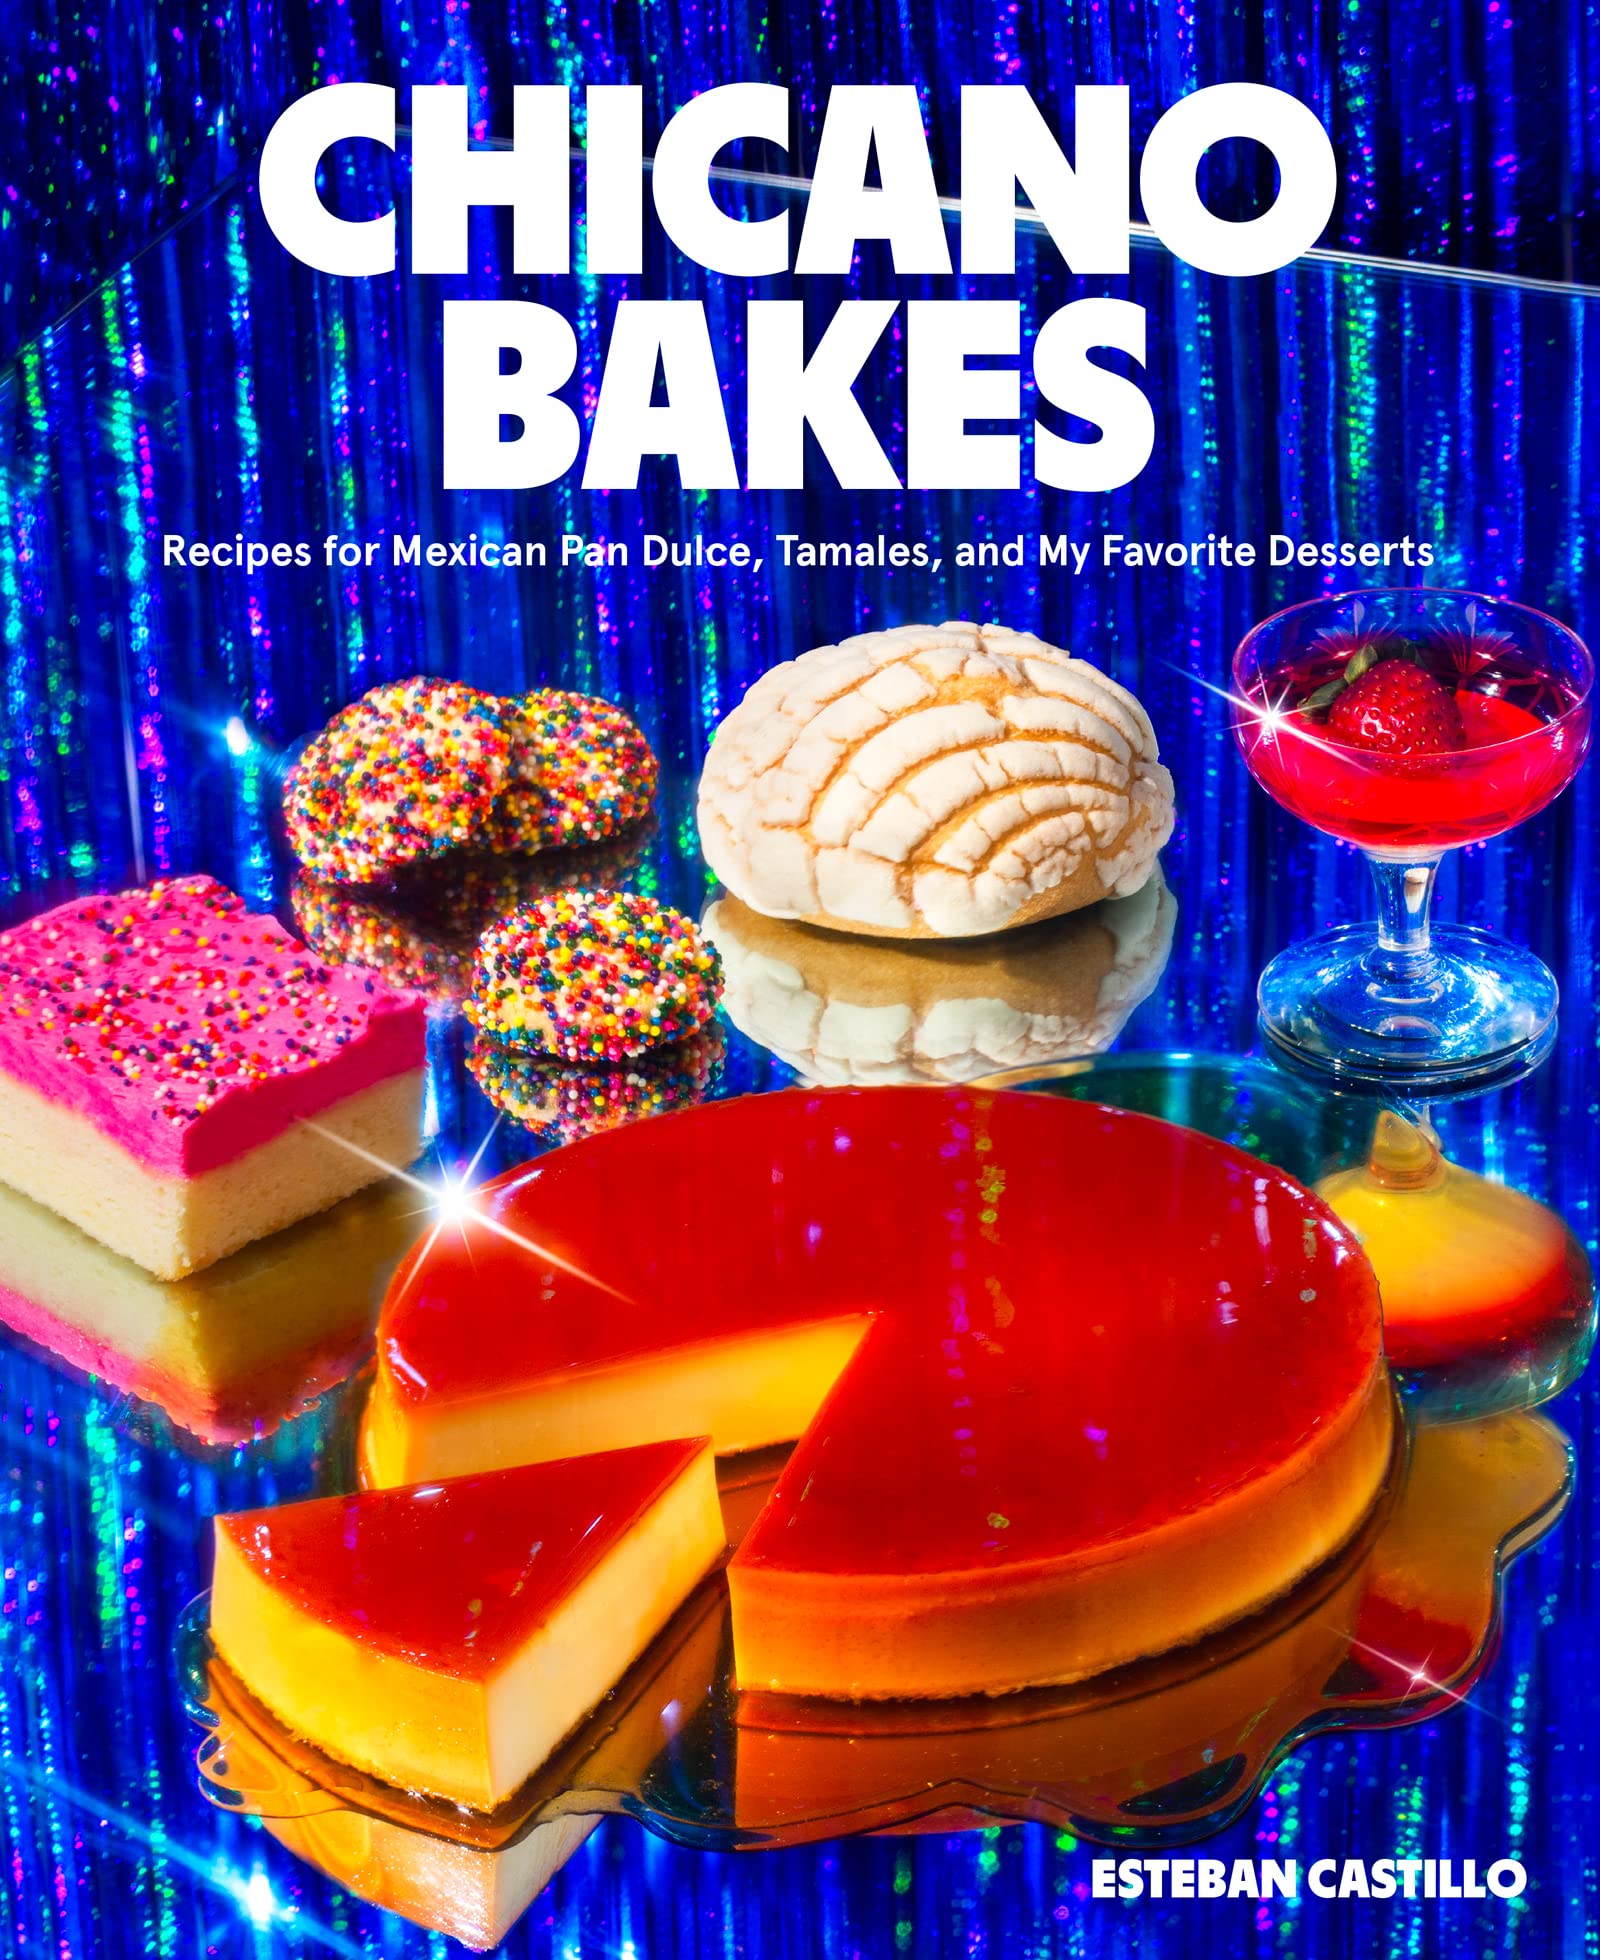 Chicano Bakes: Recipes for Mexican Pan Dulce, Tamales, and My Favorite Desserts (Esteban Castillo)